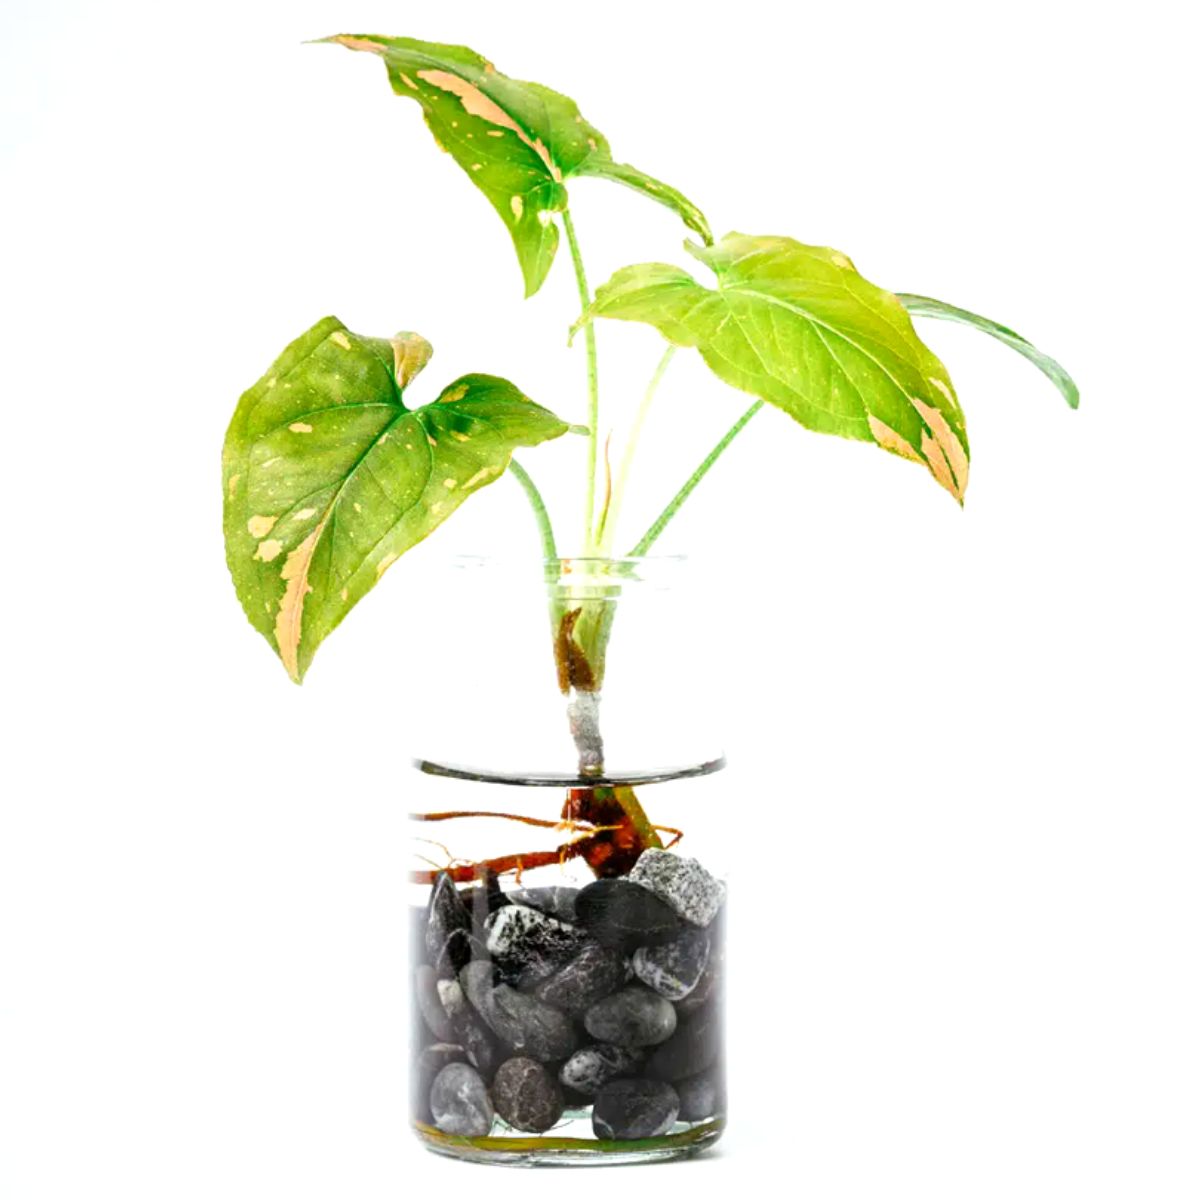 Arrow plant is one of the best hydroponic plant options